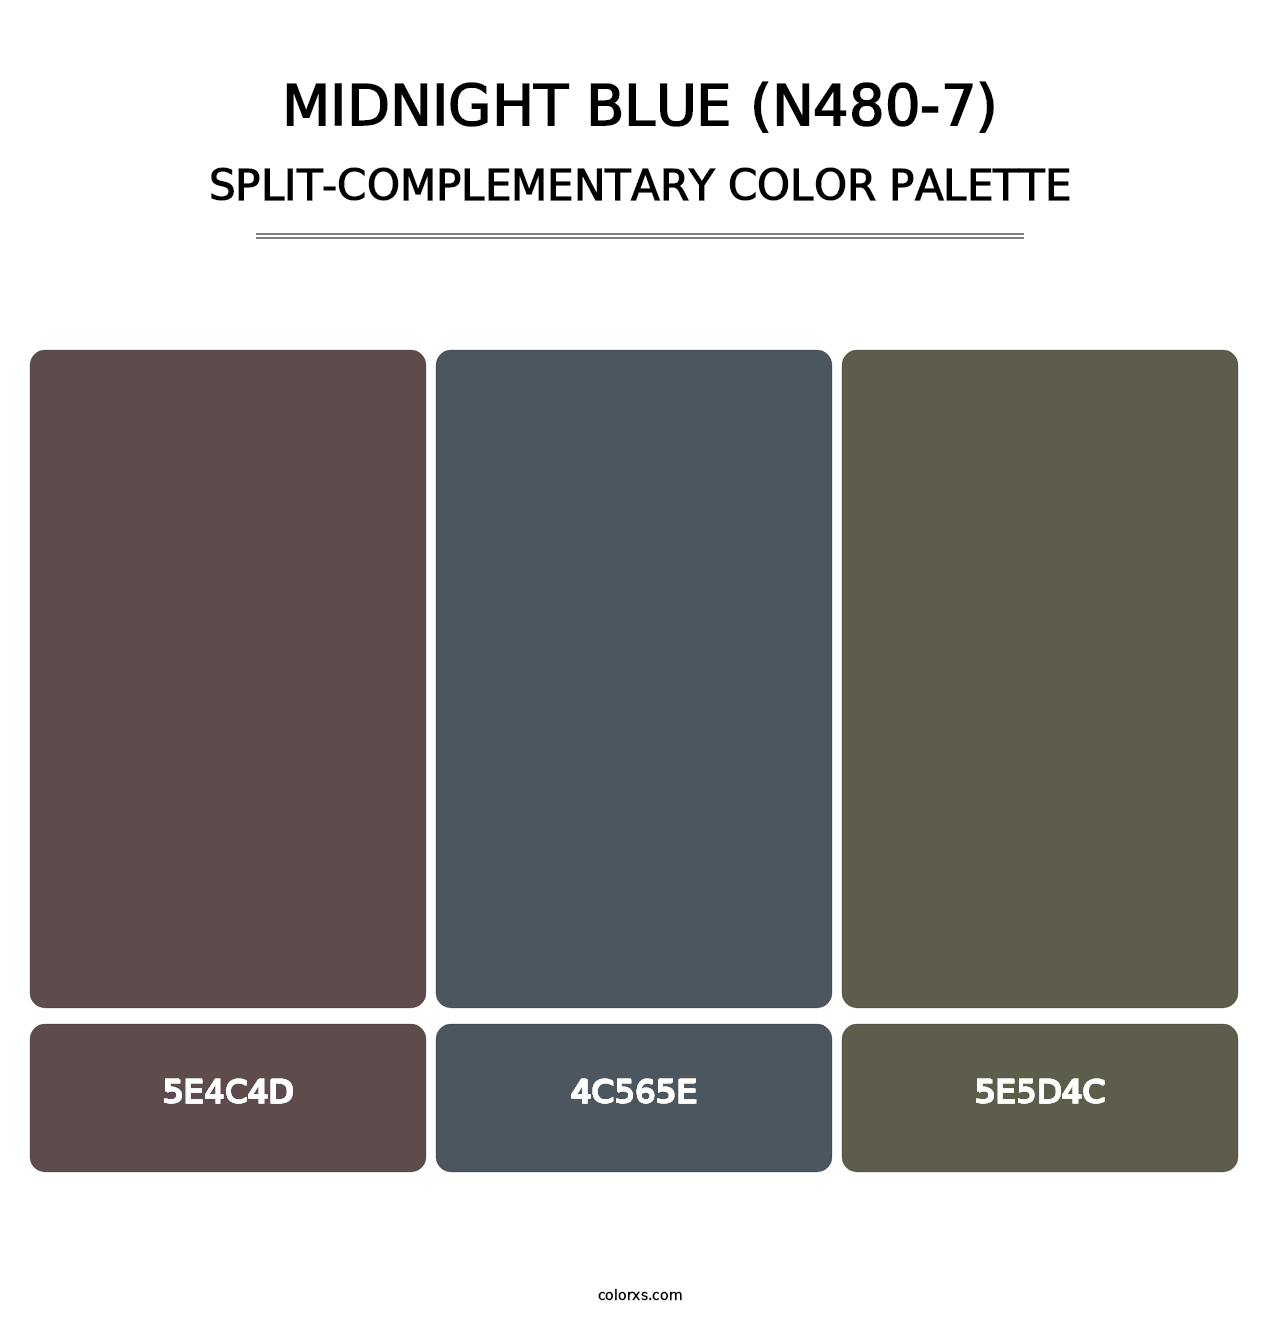 Midnight Blue (N480-7) - Split-Complementary Color Palette